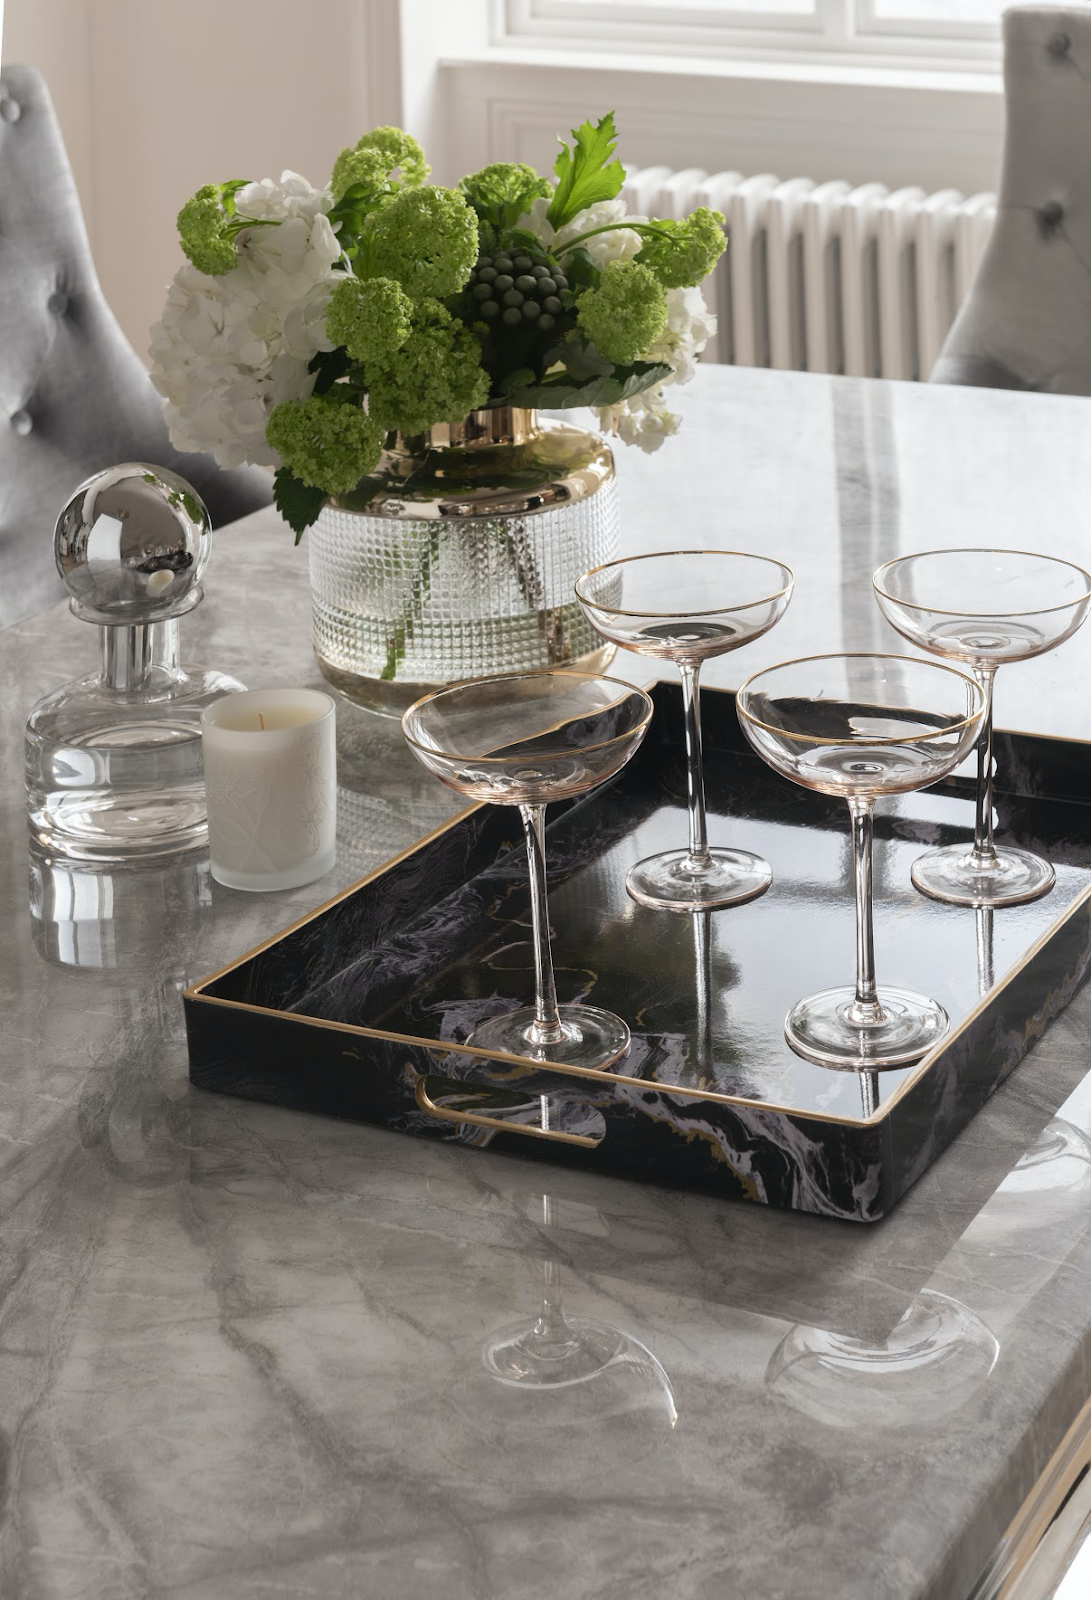 How to Dress Your Dining Table